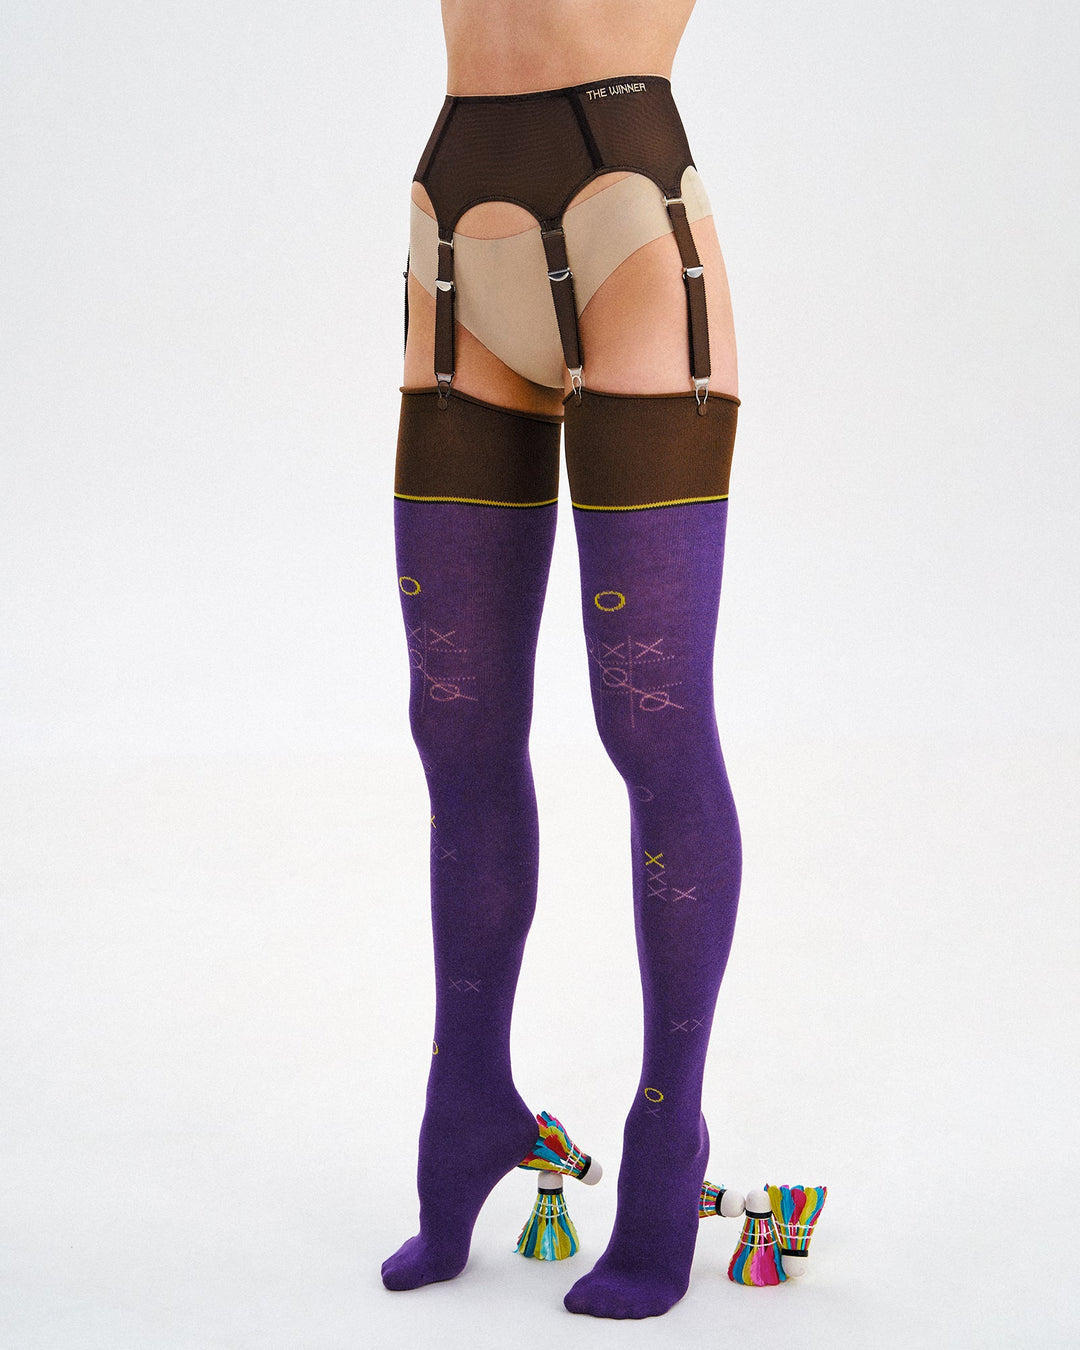 Lucky Lilac stockings